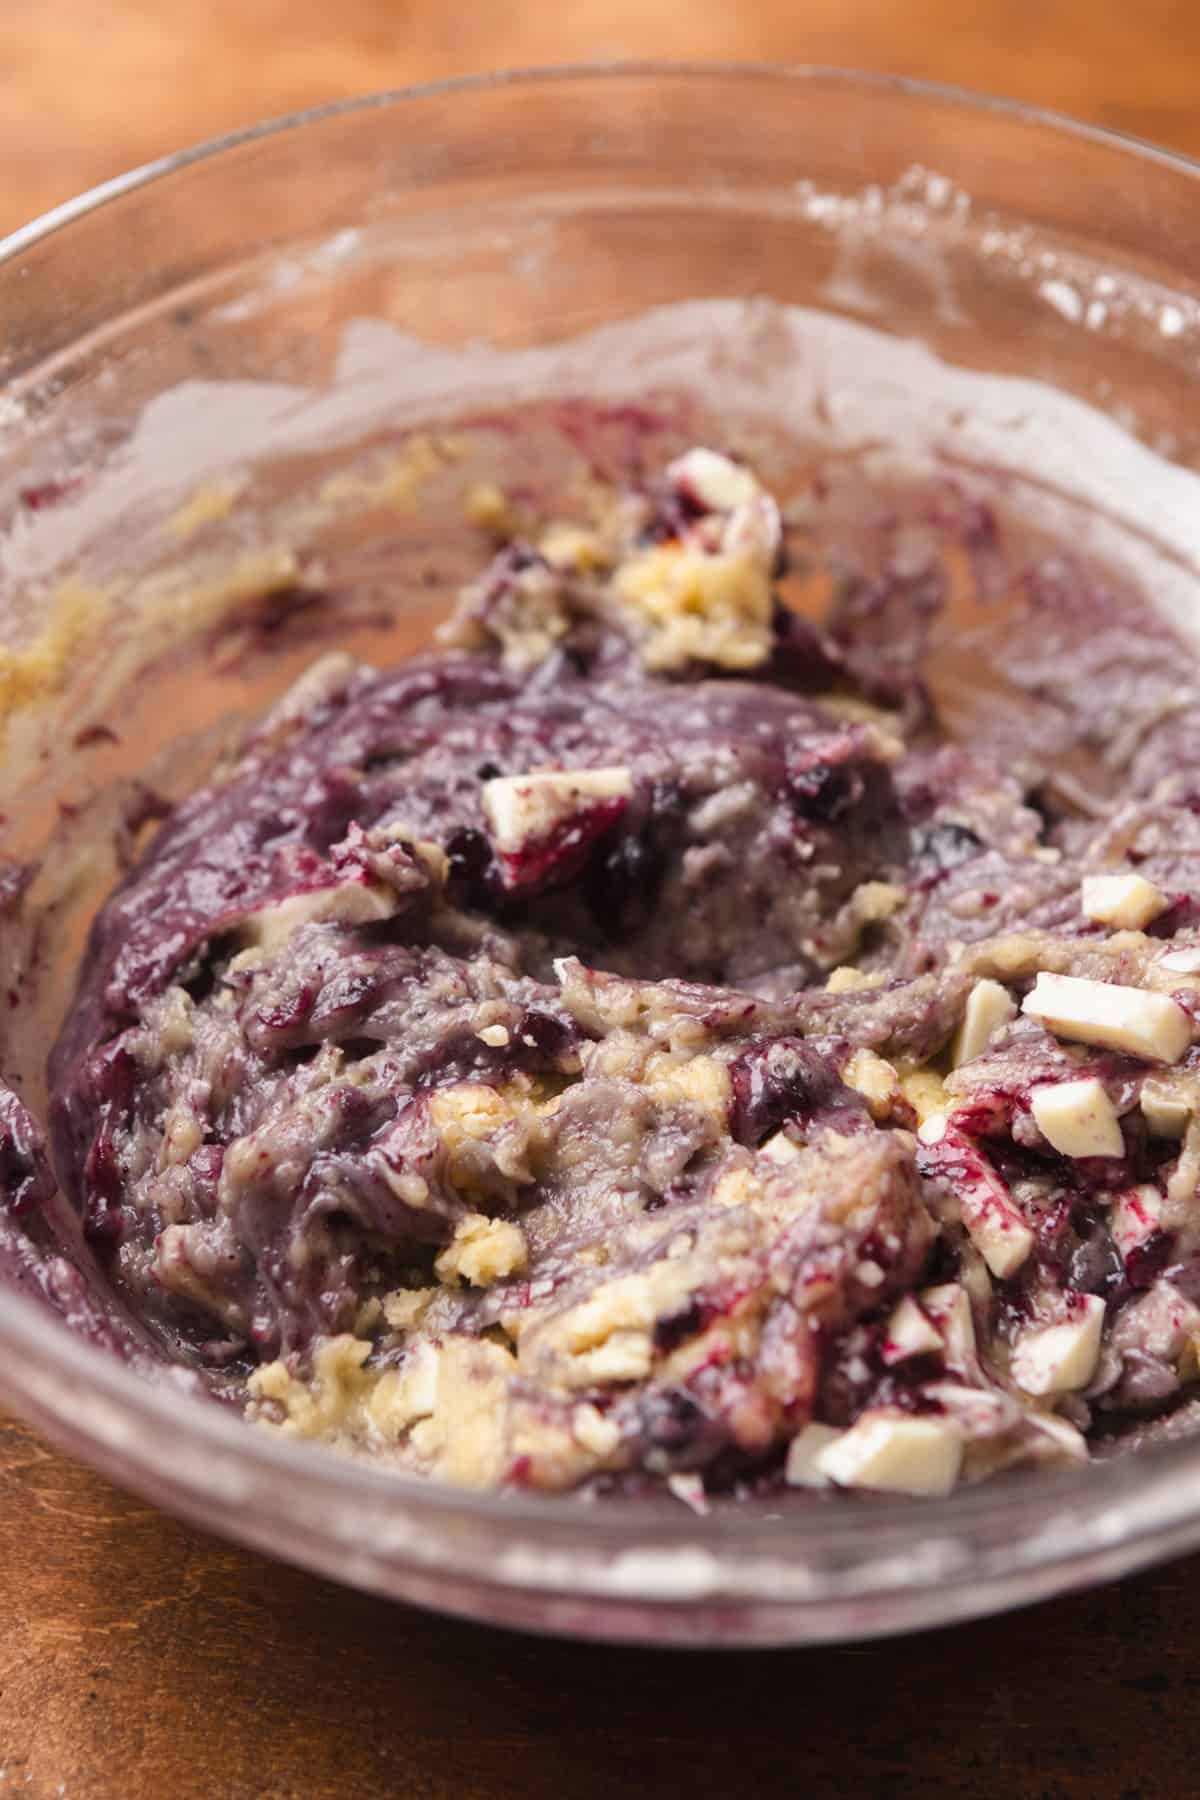 Blueberry white chocolate cookie dough in a bowl.